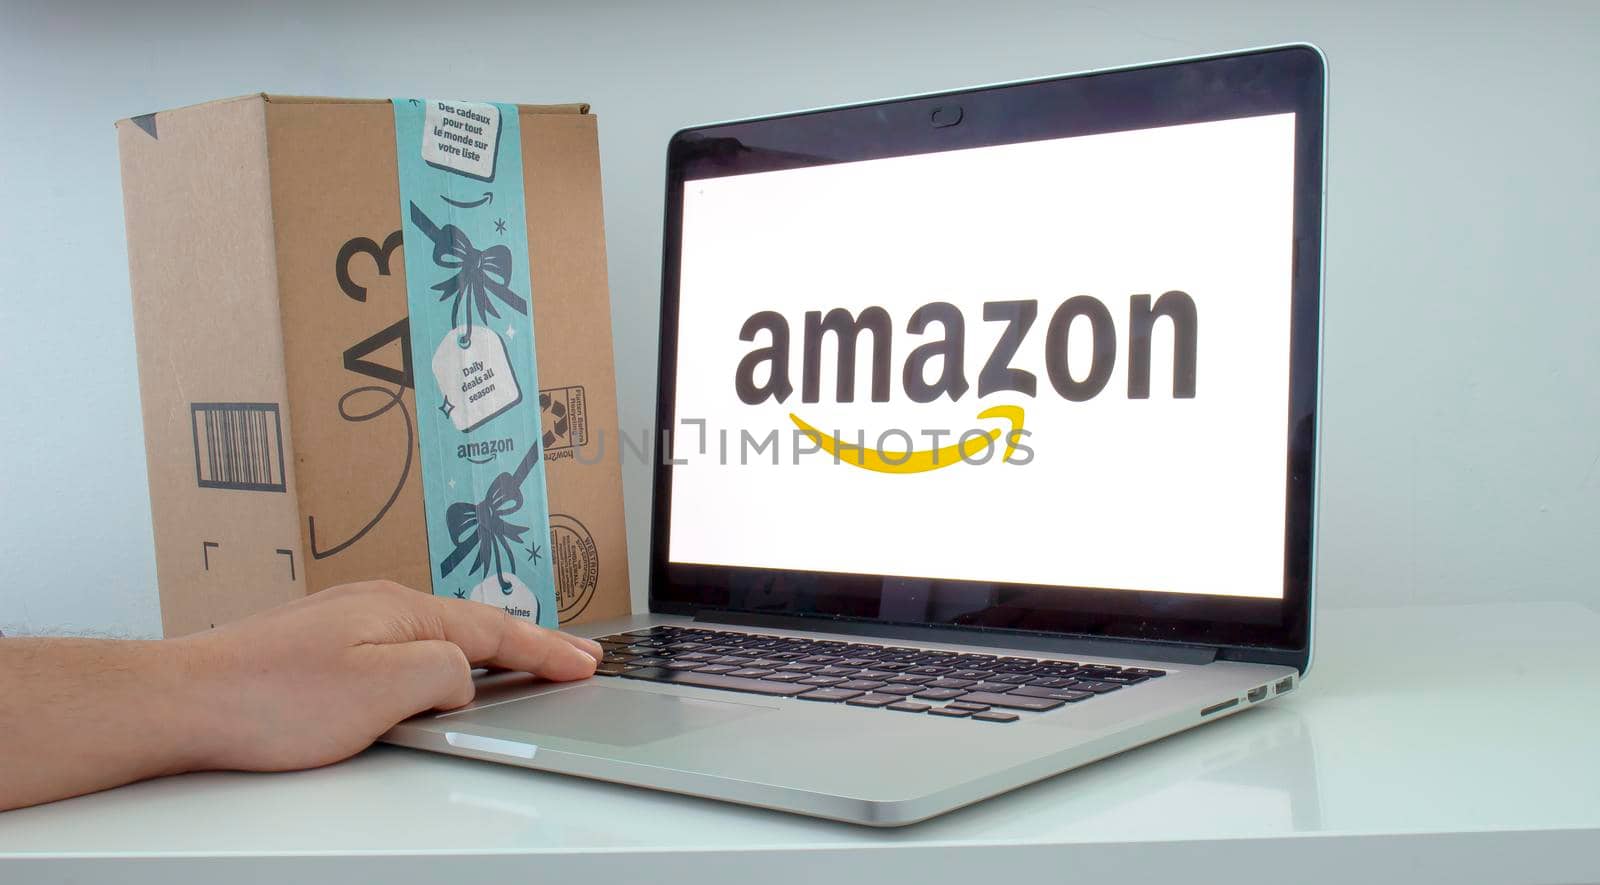 Calgary, Alberta. Canada Dec 11 2019: A Person’s hand is using an apple computer on amazon. Amazon’s fight with US president is about much more than $10bn. Illustrative by oasisamuel